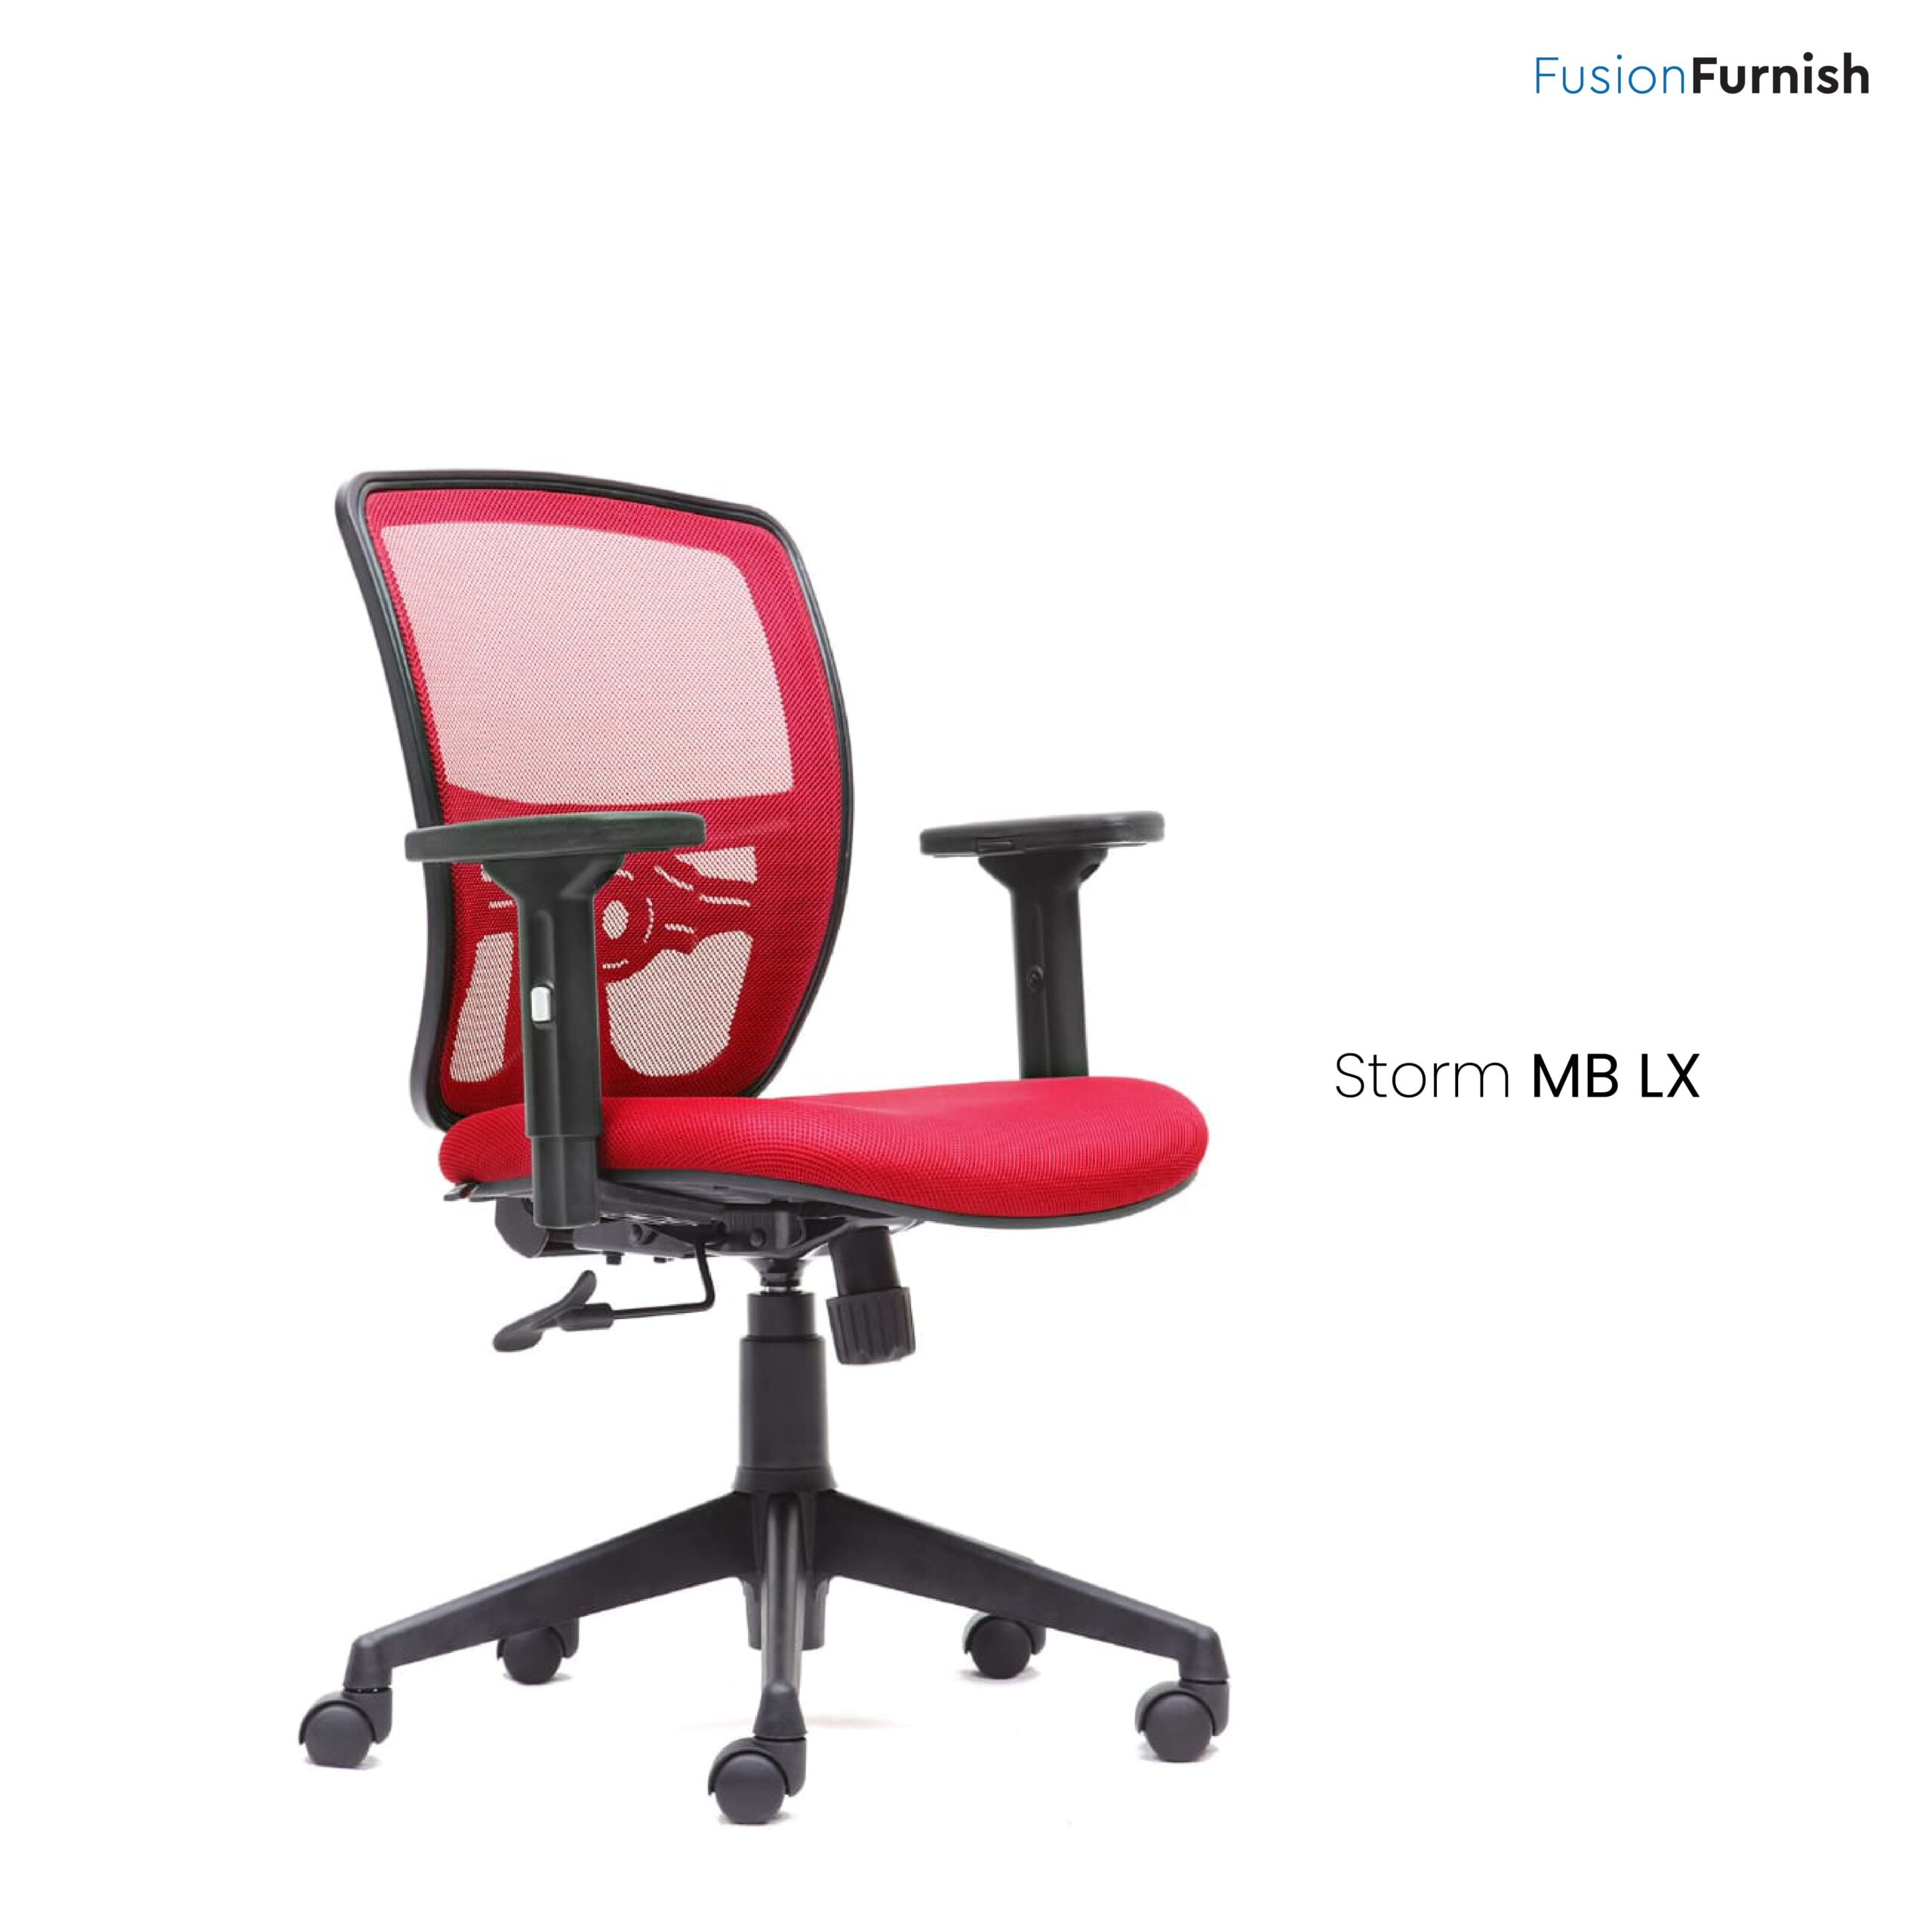 STORM MB LXAn office chair combining the comfort of mesh back, PU pad adjustable arms and smooth glide wheels is the perfect way to upscale your office seating options.